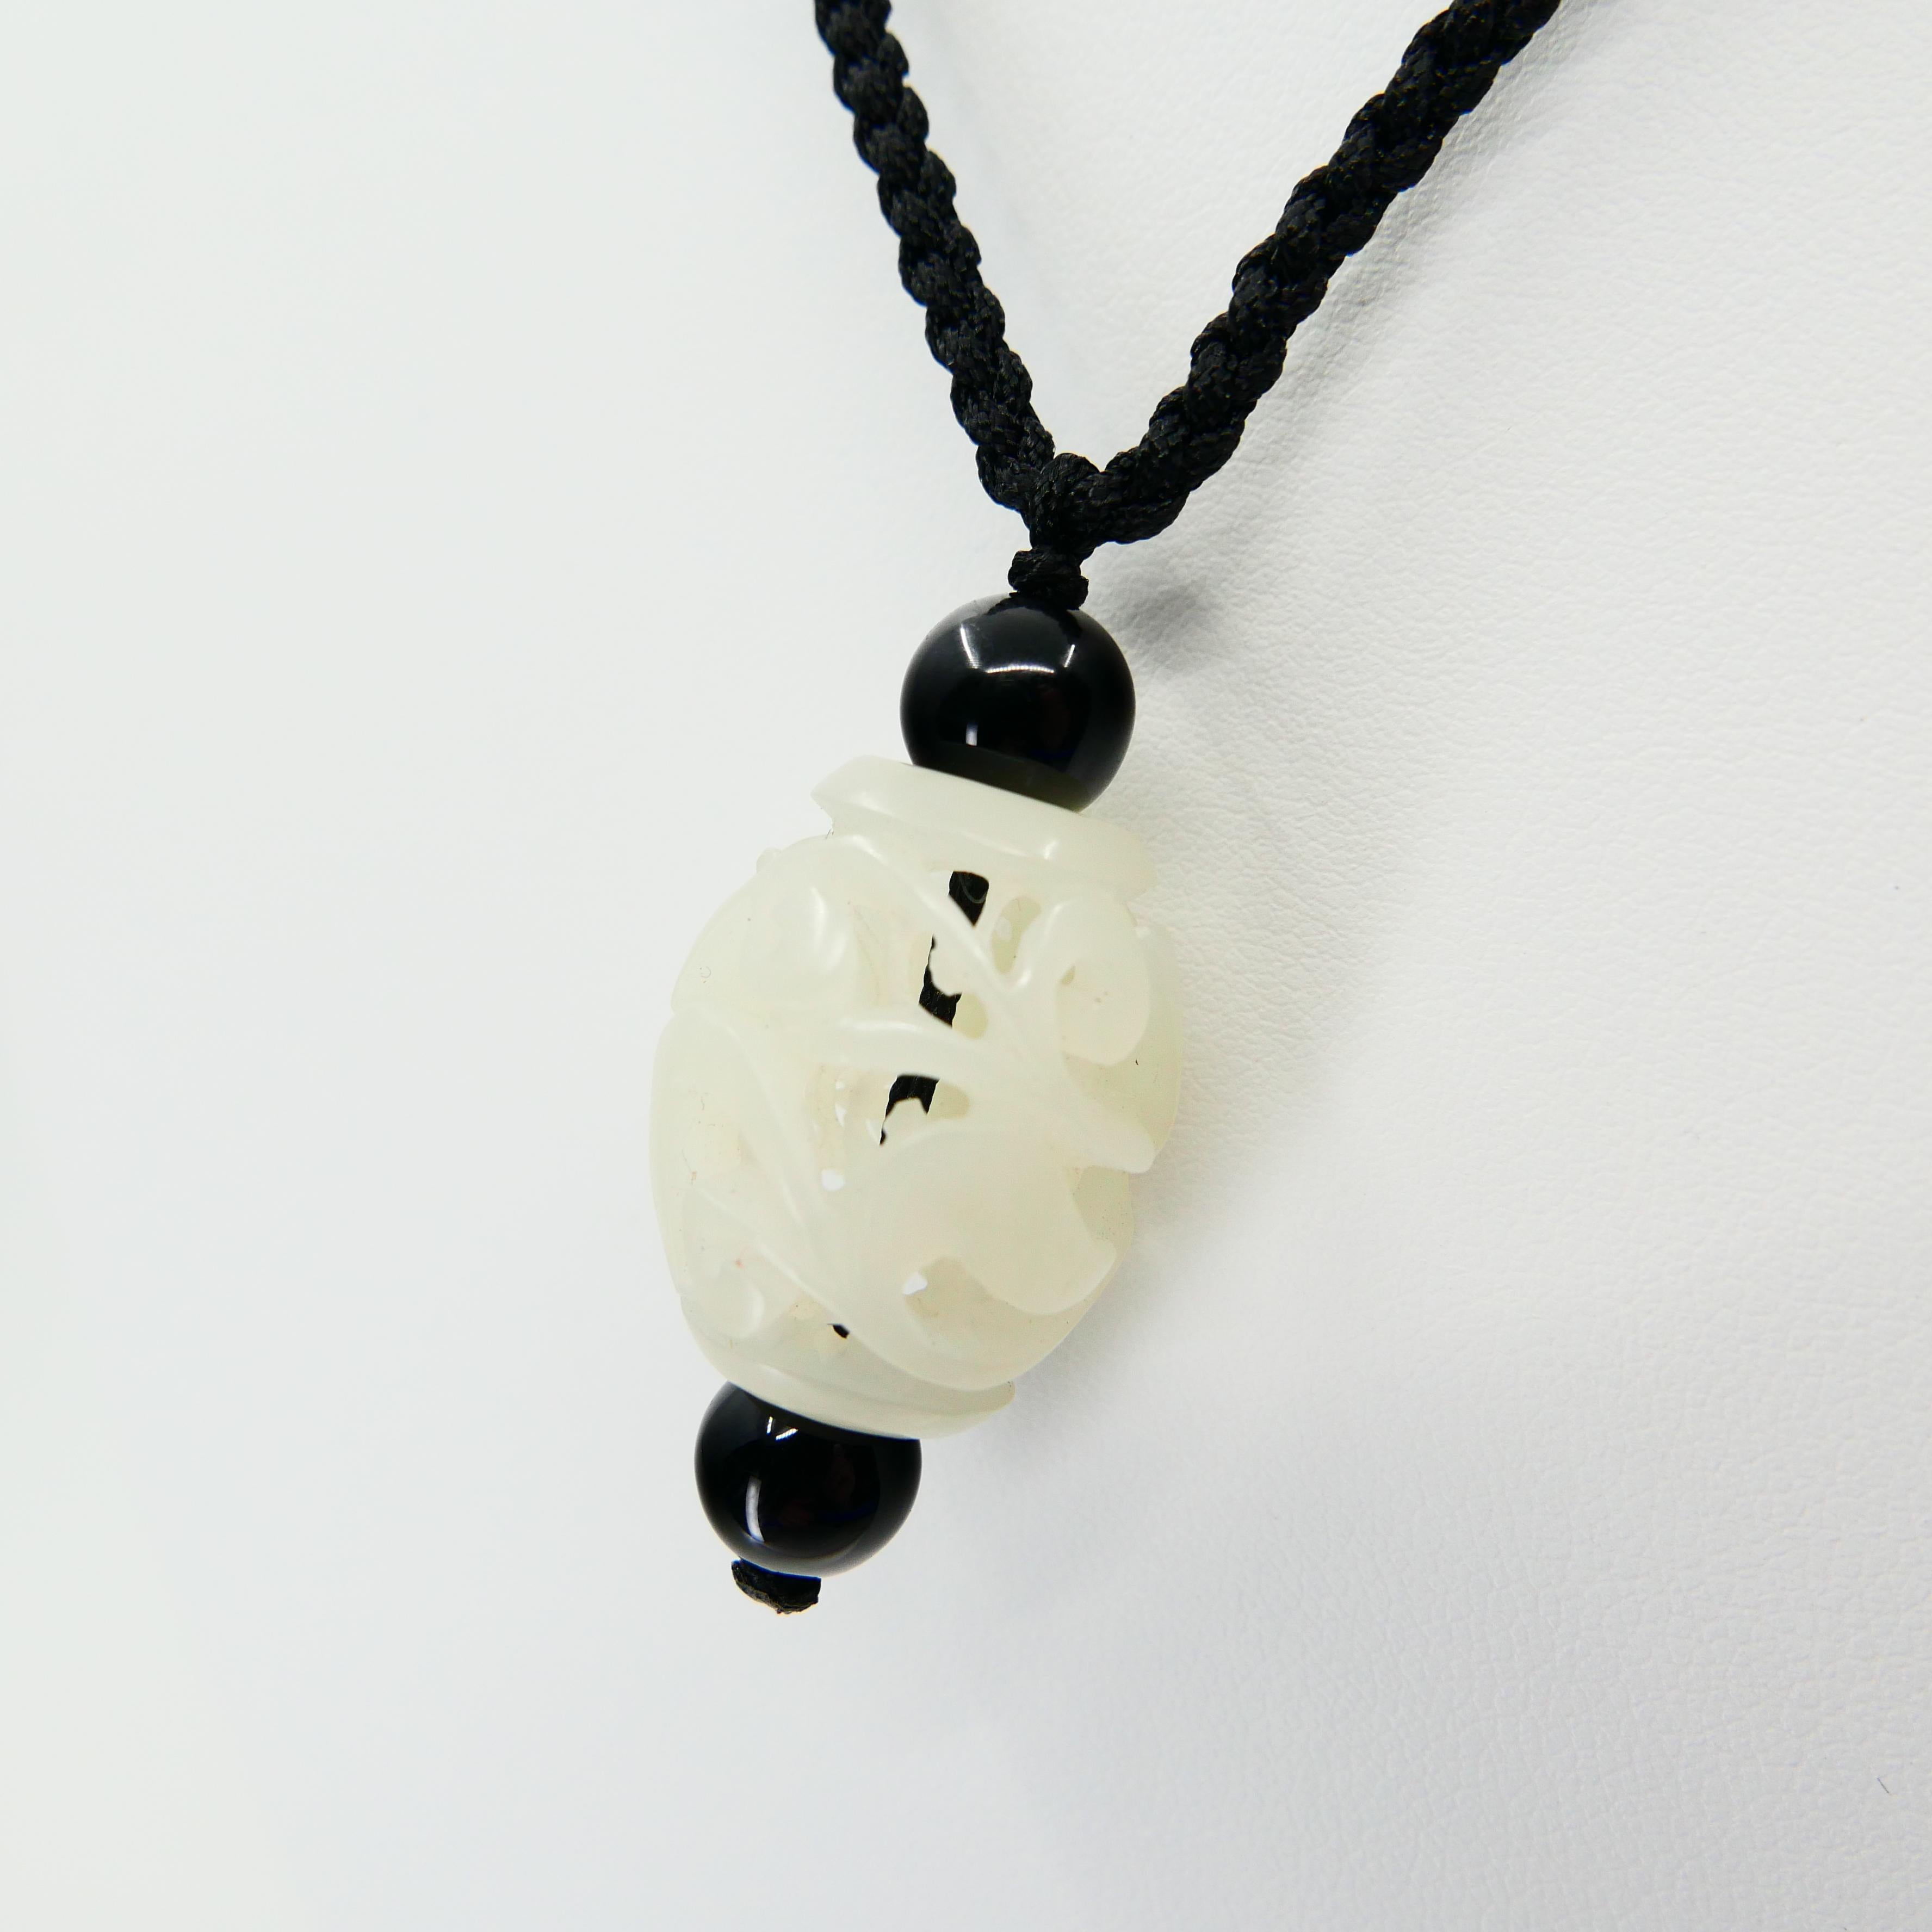 Women's or Men's Certified Natural Nephrite White Jade Pendant, Well Hollowed, Detailed Carving For Sale